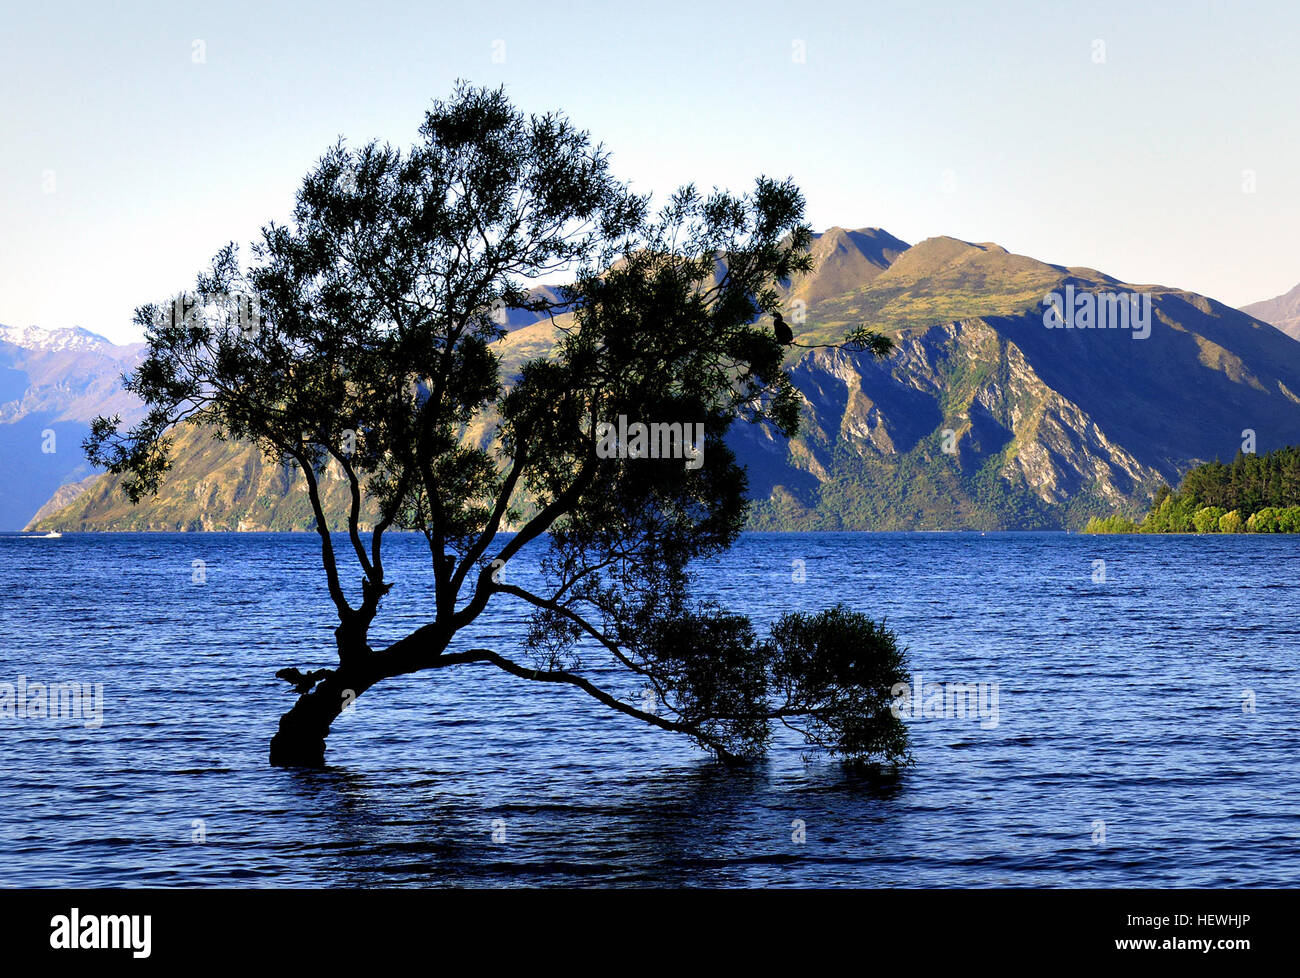 Lake Wanaka is location at the foot of the Southern Alps of NZ Sth Island with the wilderness of Mt Aspiring National Park nearby. Roys Bay is at the southern end of Lake Wanaka. Rooted firmly into the earth near the shore of Roys Bay is a lone tree. On high tide its base is submerged. How it got there I don't know. Was it a seed dropped by a bird many years ago, maybe. One thing's for sure, it's a very popular tree with photographers, painters and sightseers. A famous land mark to the area. Stock Photo